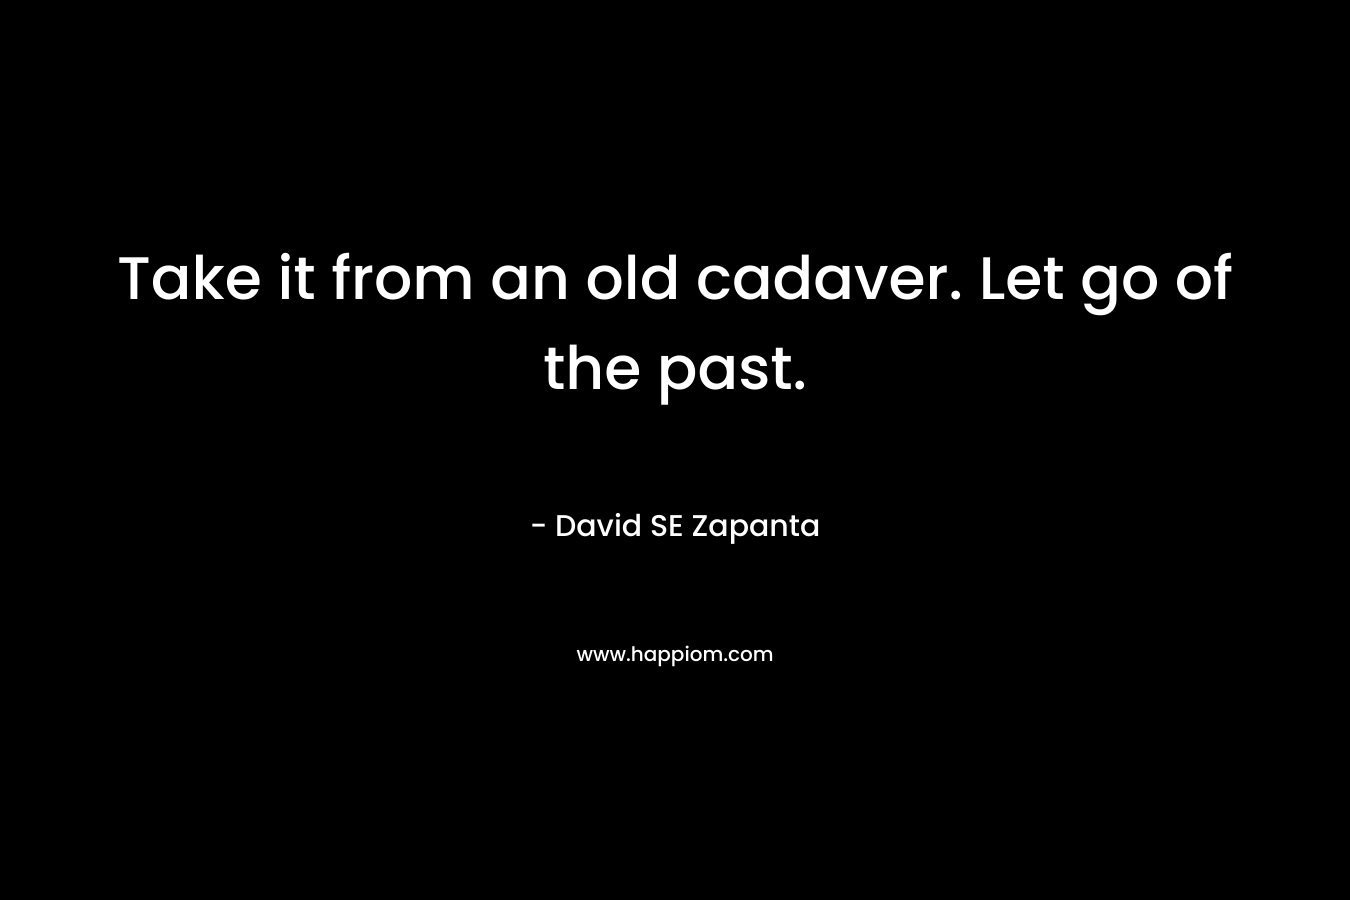 Take it from an old cadaver. Let go of the past. – David SE Zapanta